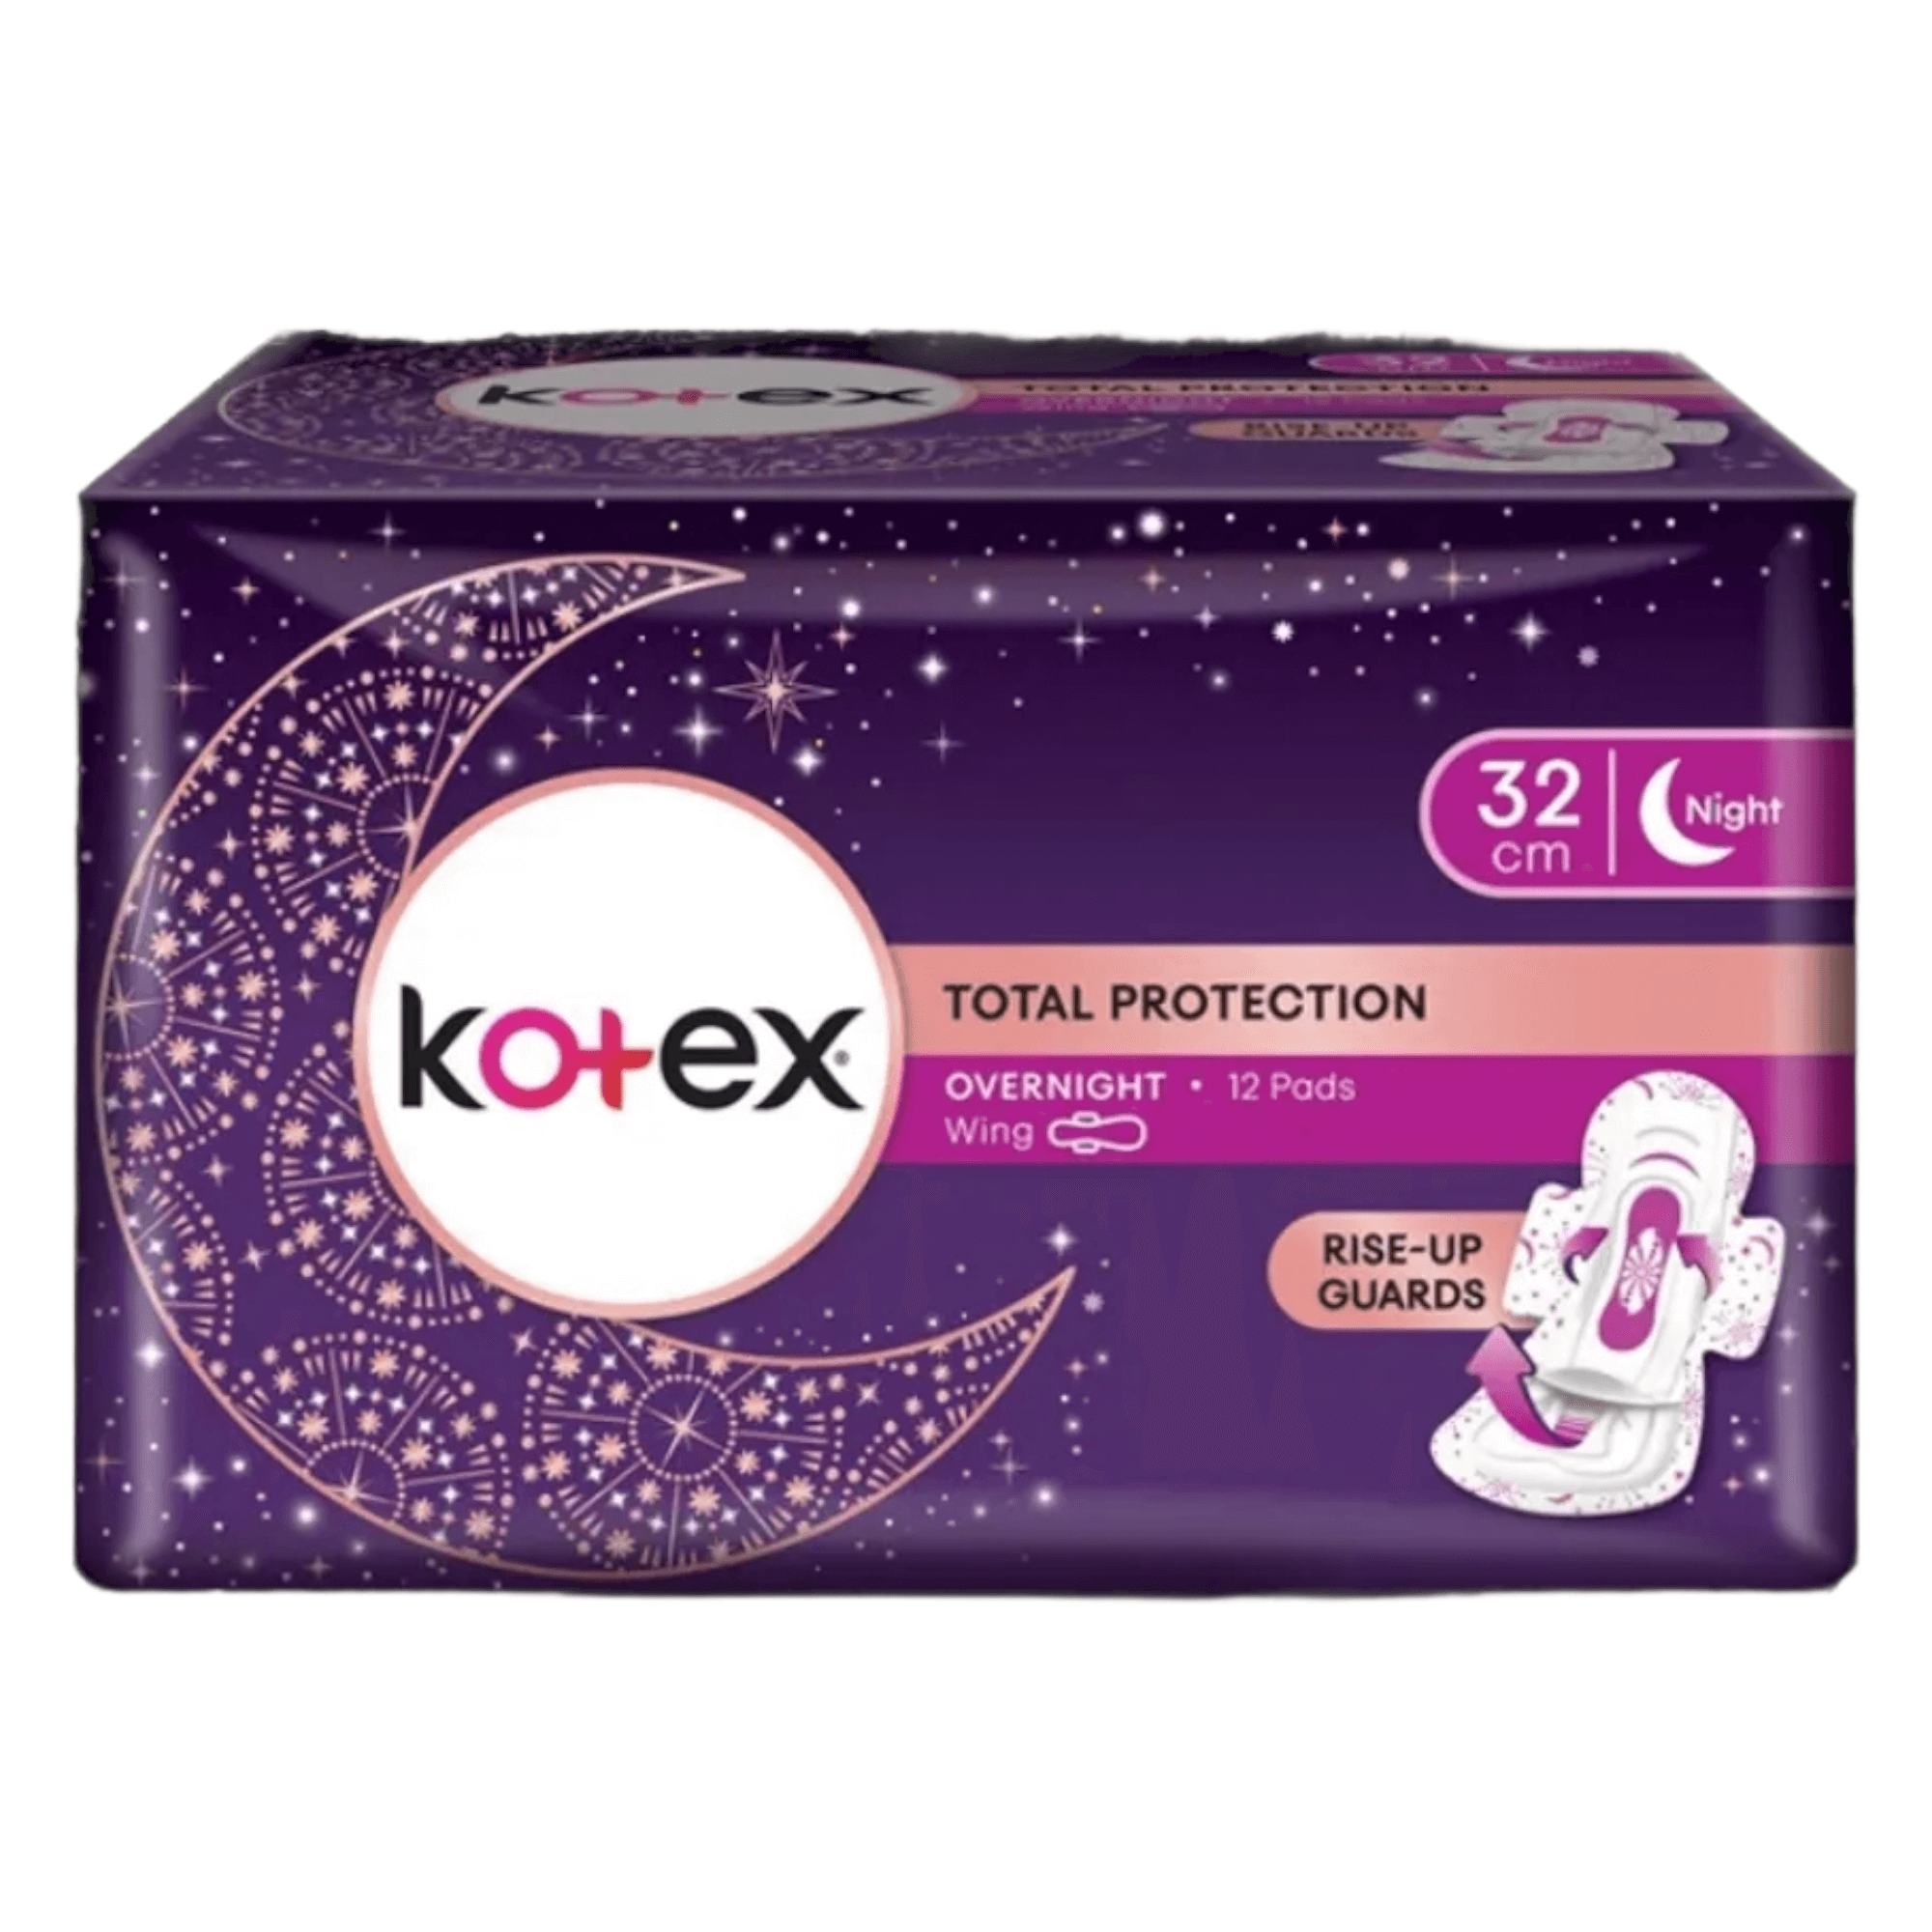 Kotex Total Protection Overnight Wing (32cm) 12 Pads – Shopifull